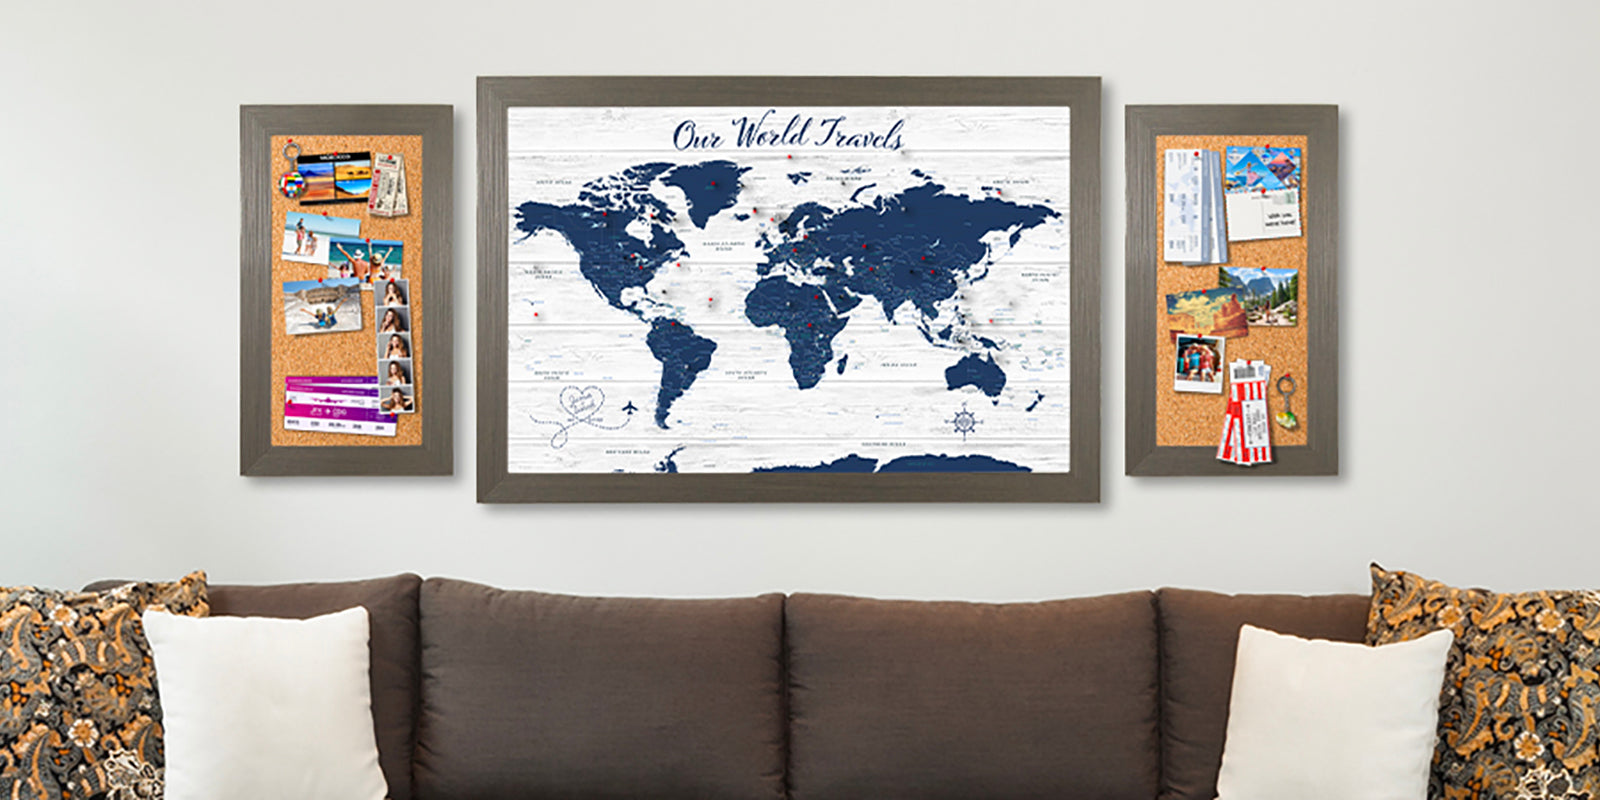 Create a Travel Wall, Anniversary World Map with Cork Memo Board Accents